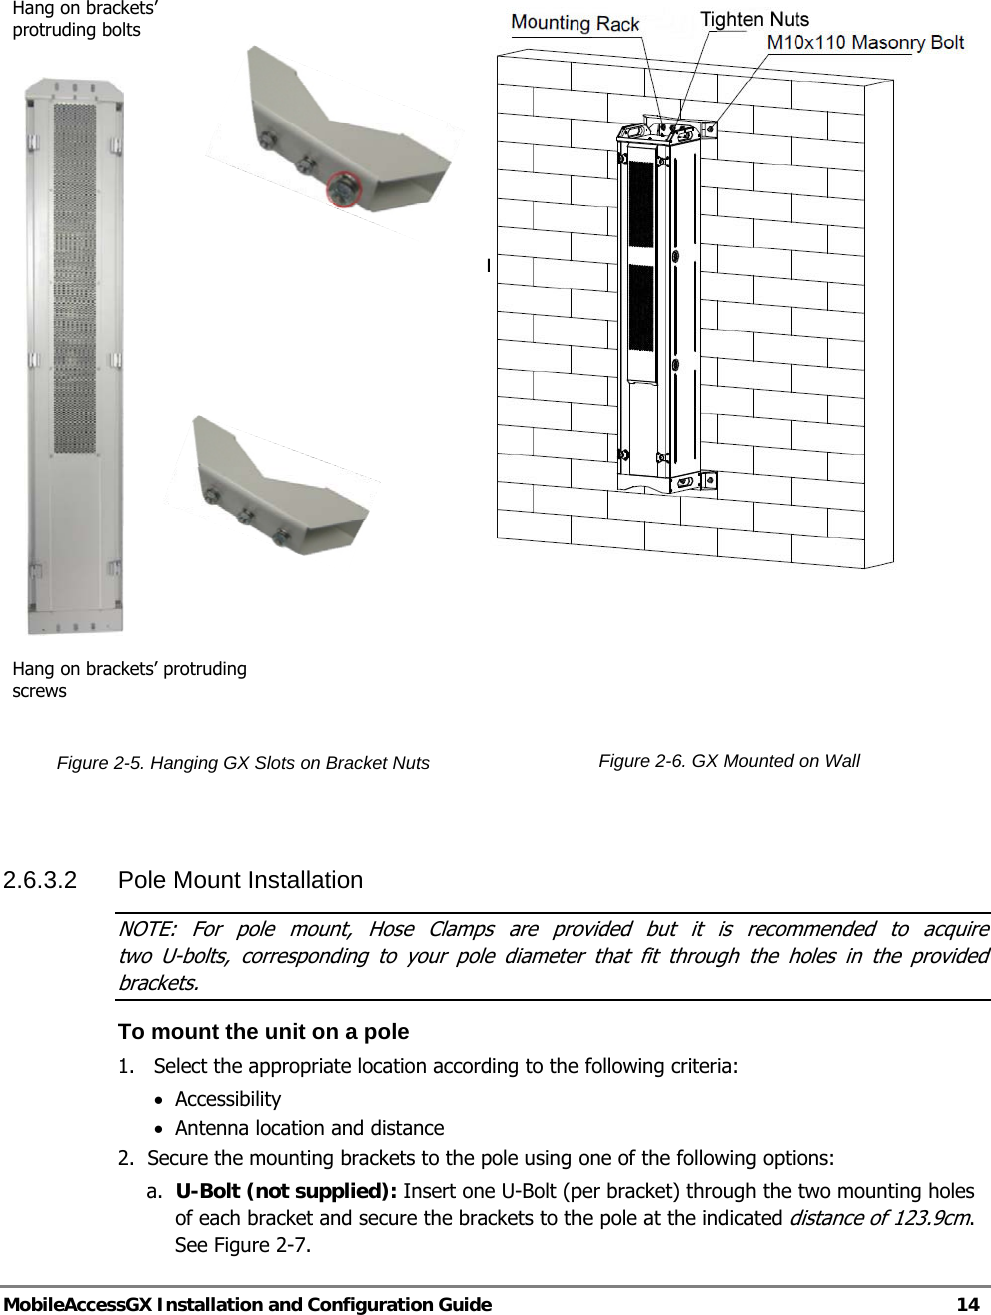   MobileAccessGX Installation and Configuration Guide   14         Figure 2-5. Hanging GX Slots on Bracket Nuts      Figure 2-6. GX Mounted on Wall   2.6.3.2 Pole Mount Installation NOTE: For pole mount, Hose Clamps are provided but it is recommended to acquire  two U-bolts, corresponding to your pole diameter that fit through the holes in the provided brackets. To mount the unit on a pole 1.  Select the appropriate location according to the following criteria: • Accessibility   • Antenna location and distance 2.  Secure the mounting brackets to the pole using one of the following options: a. U-Bolt (not supplied): Insert one U-Bolt (per bracket) through the two mounting holes of each bracket and secure the brackets to the pole at the indicated distance of 123.9cm. See Figure 2-7. Hang on brackets’ protruding bolts Hang on brackets’ protruding screws PULL DOWNFIRMLY